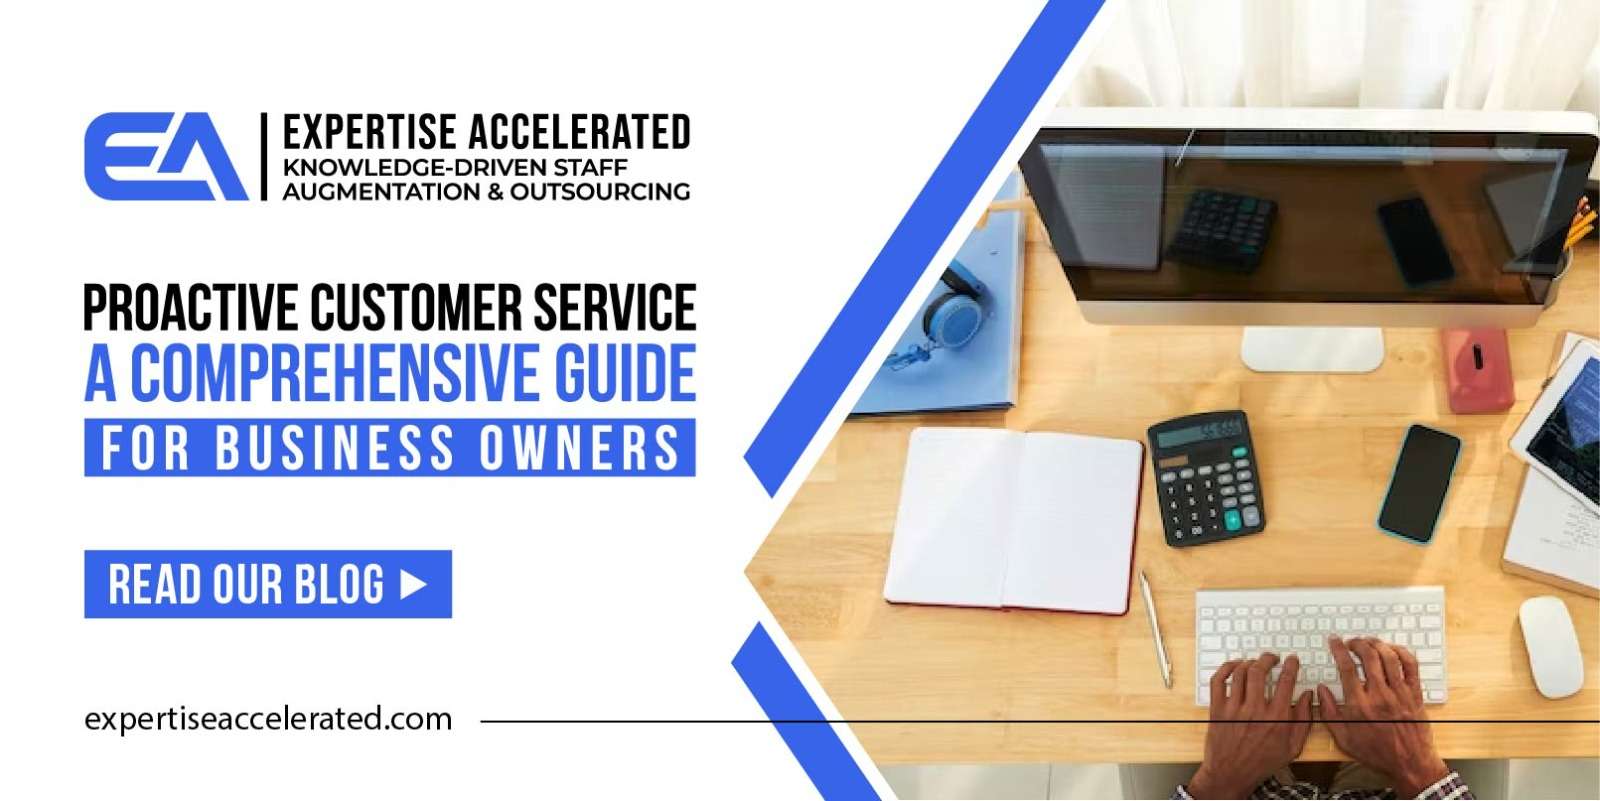 Proactive customer service: A Comprehensive Guide for Business Owners